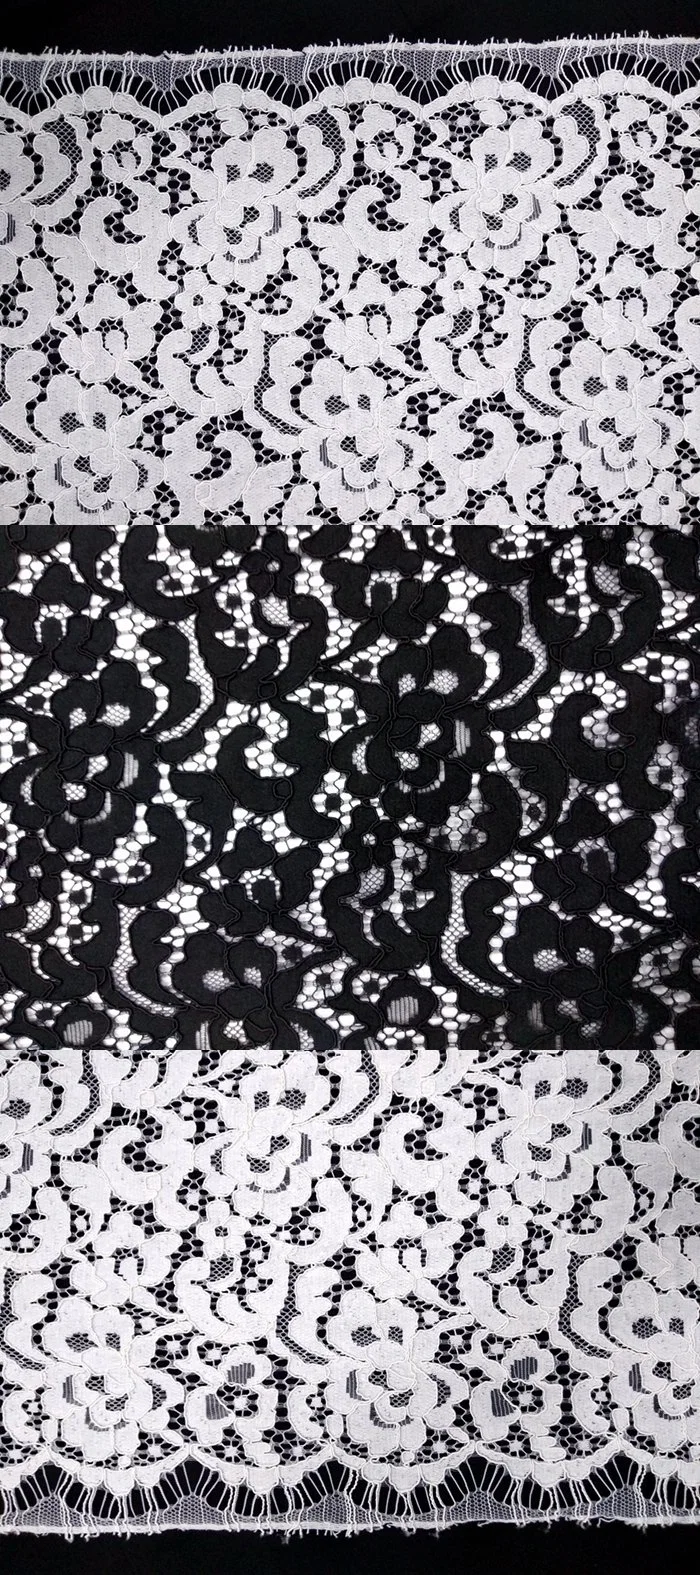 High Quality 3D Laser Cut Patchwork Lace Fabric Tulle Embroidery Lace for Decoration of Garment Accessories